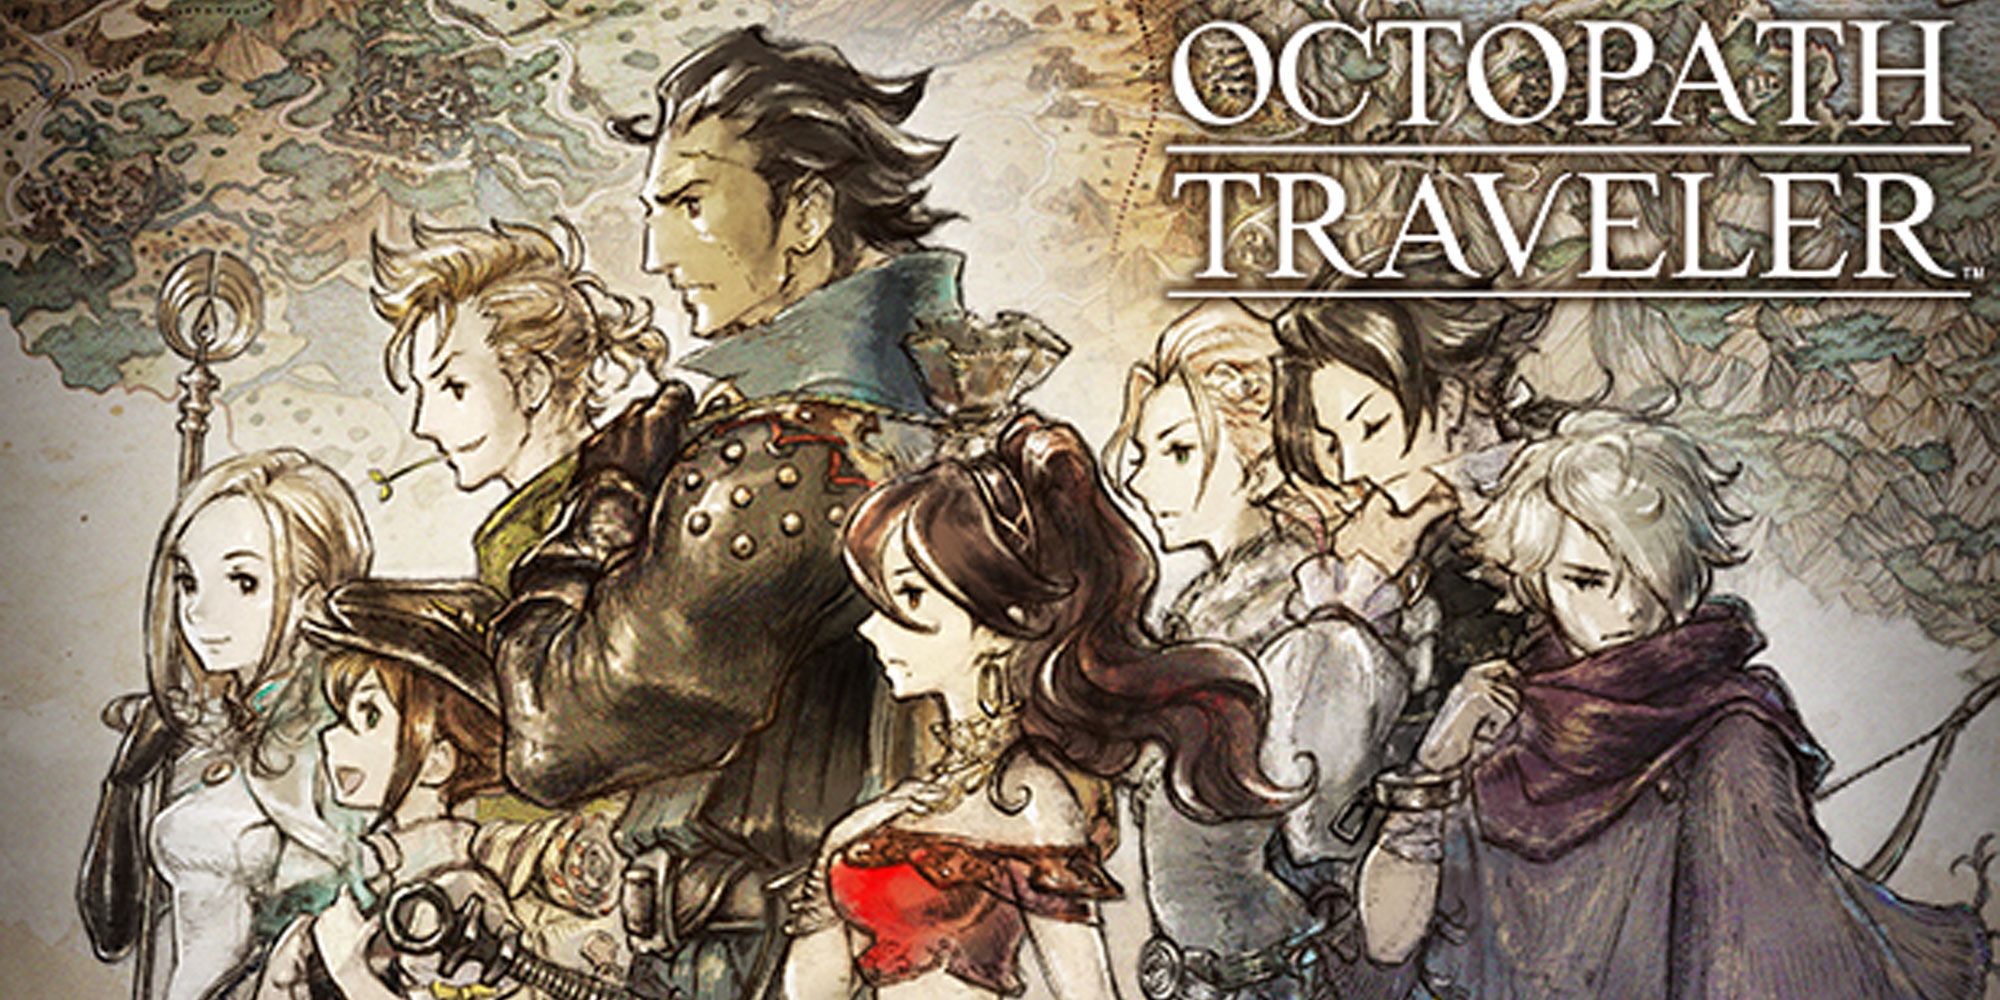 Octopath Traveler cover art featuring the main eight characters under the game's stylized title.